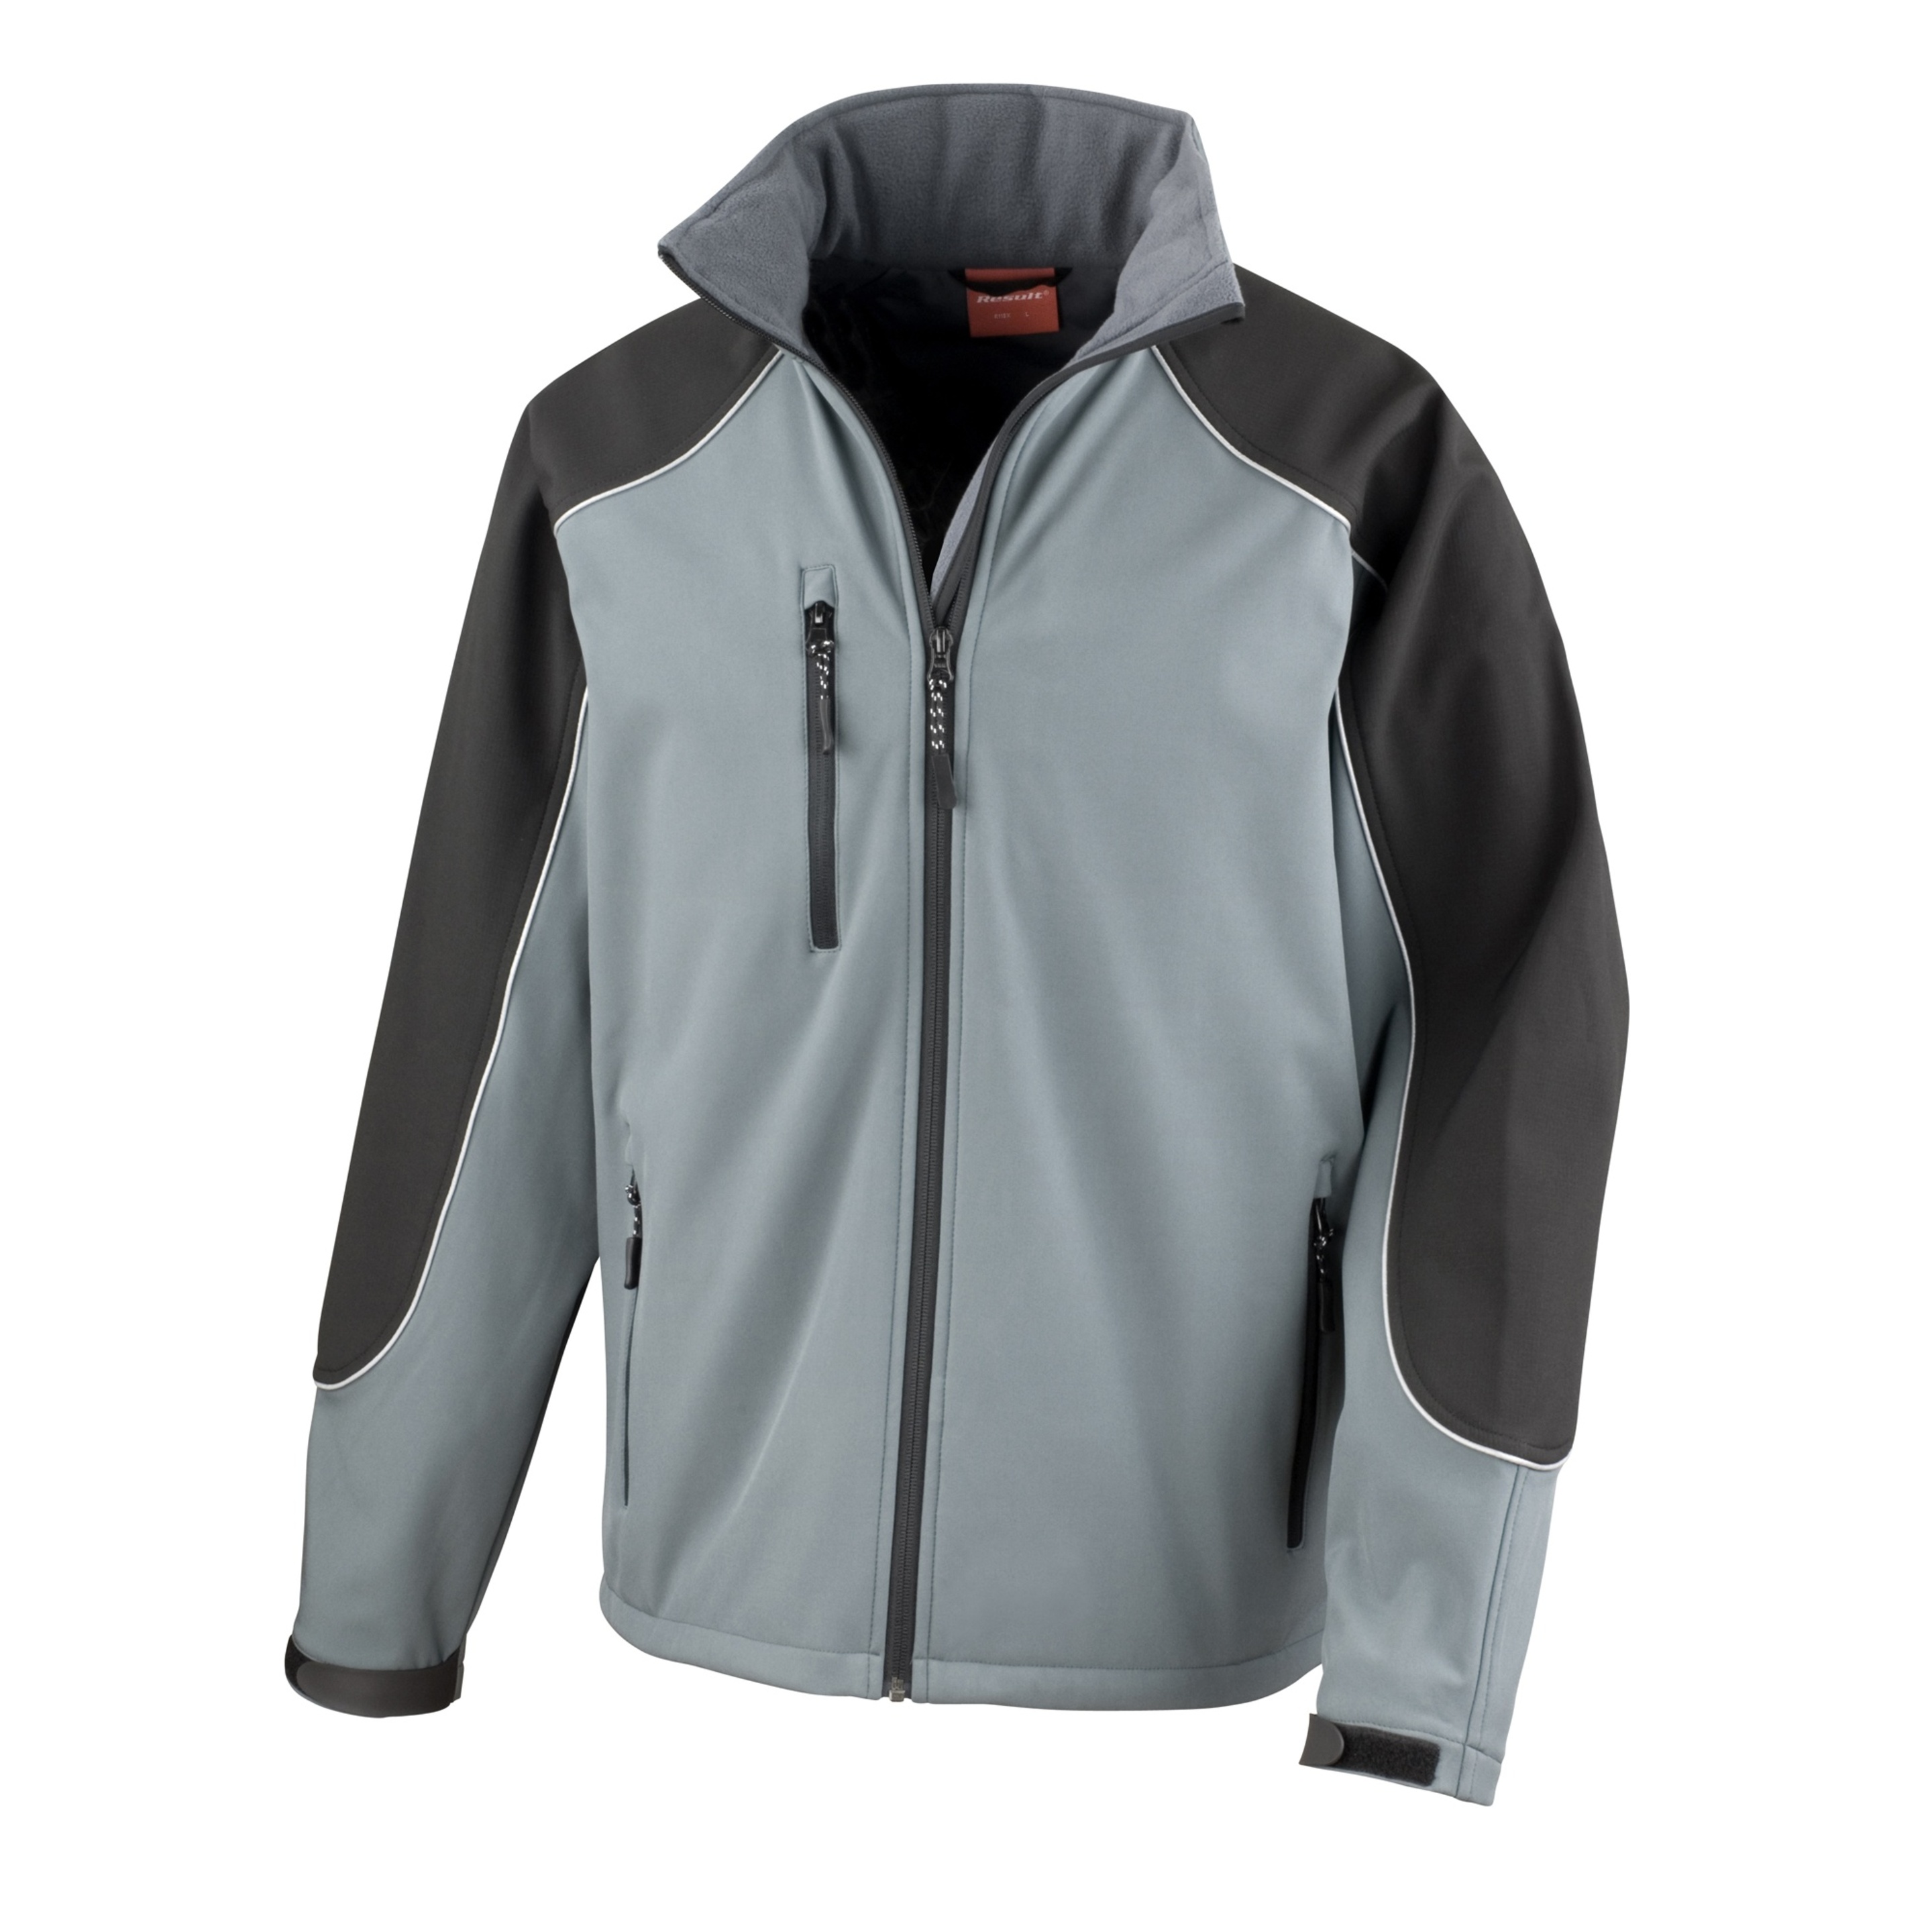 Chaqueta Softshell Con Capucha Transpirable E Impermeable Modelo Ice Fell Result - Gris  MKP